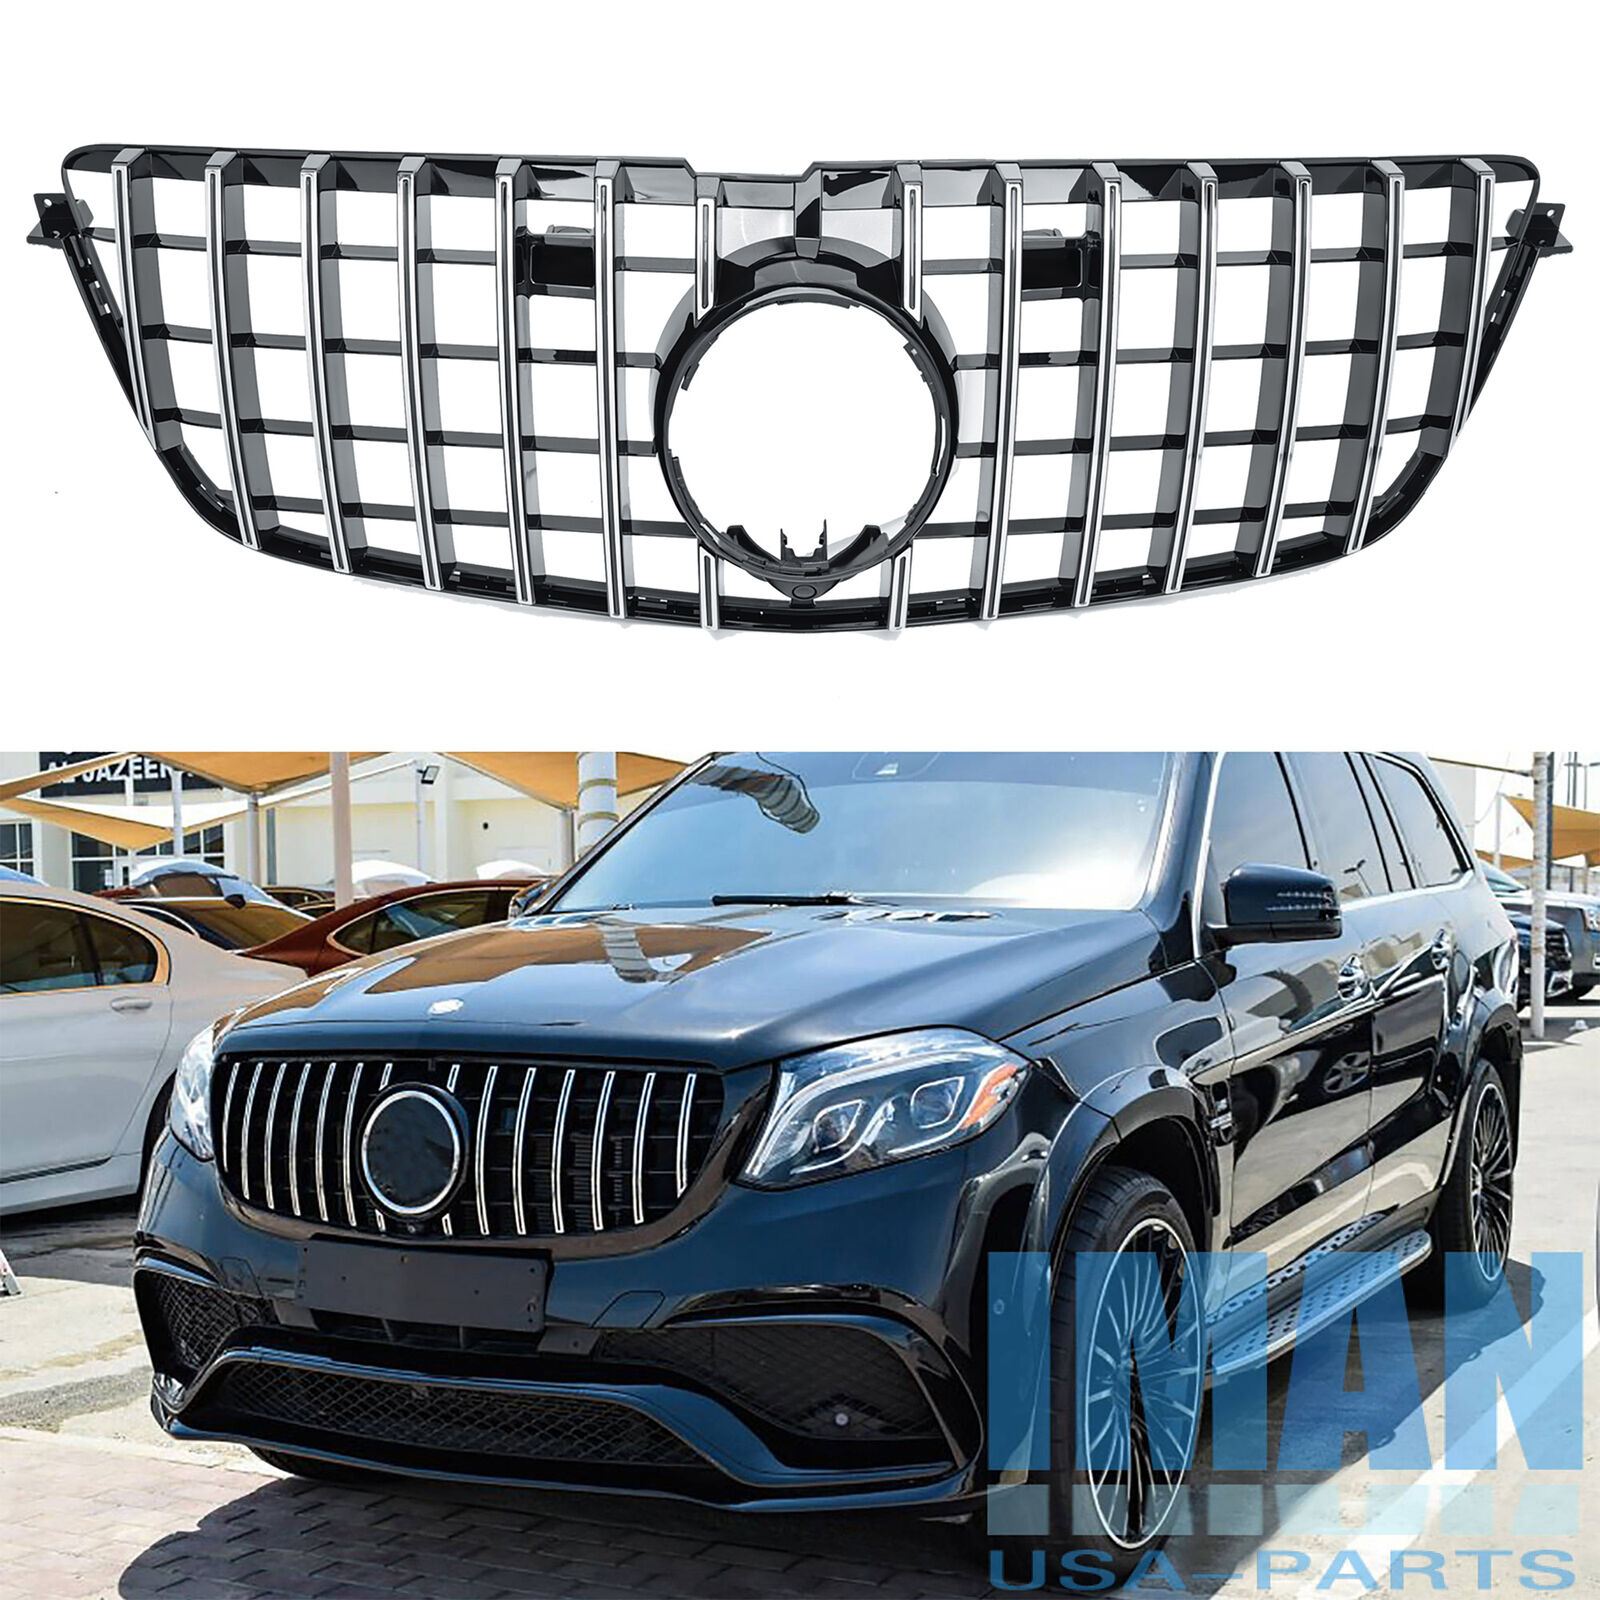 Chrome GT Style Grill Front Grille For Mercedes X166 GL500 GL550 GL63AMG 2013-15